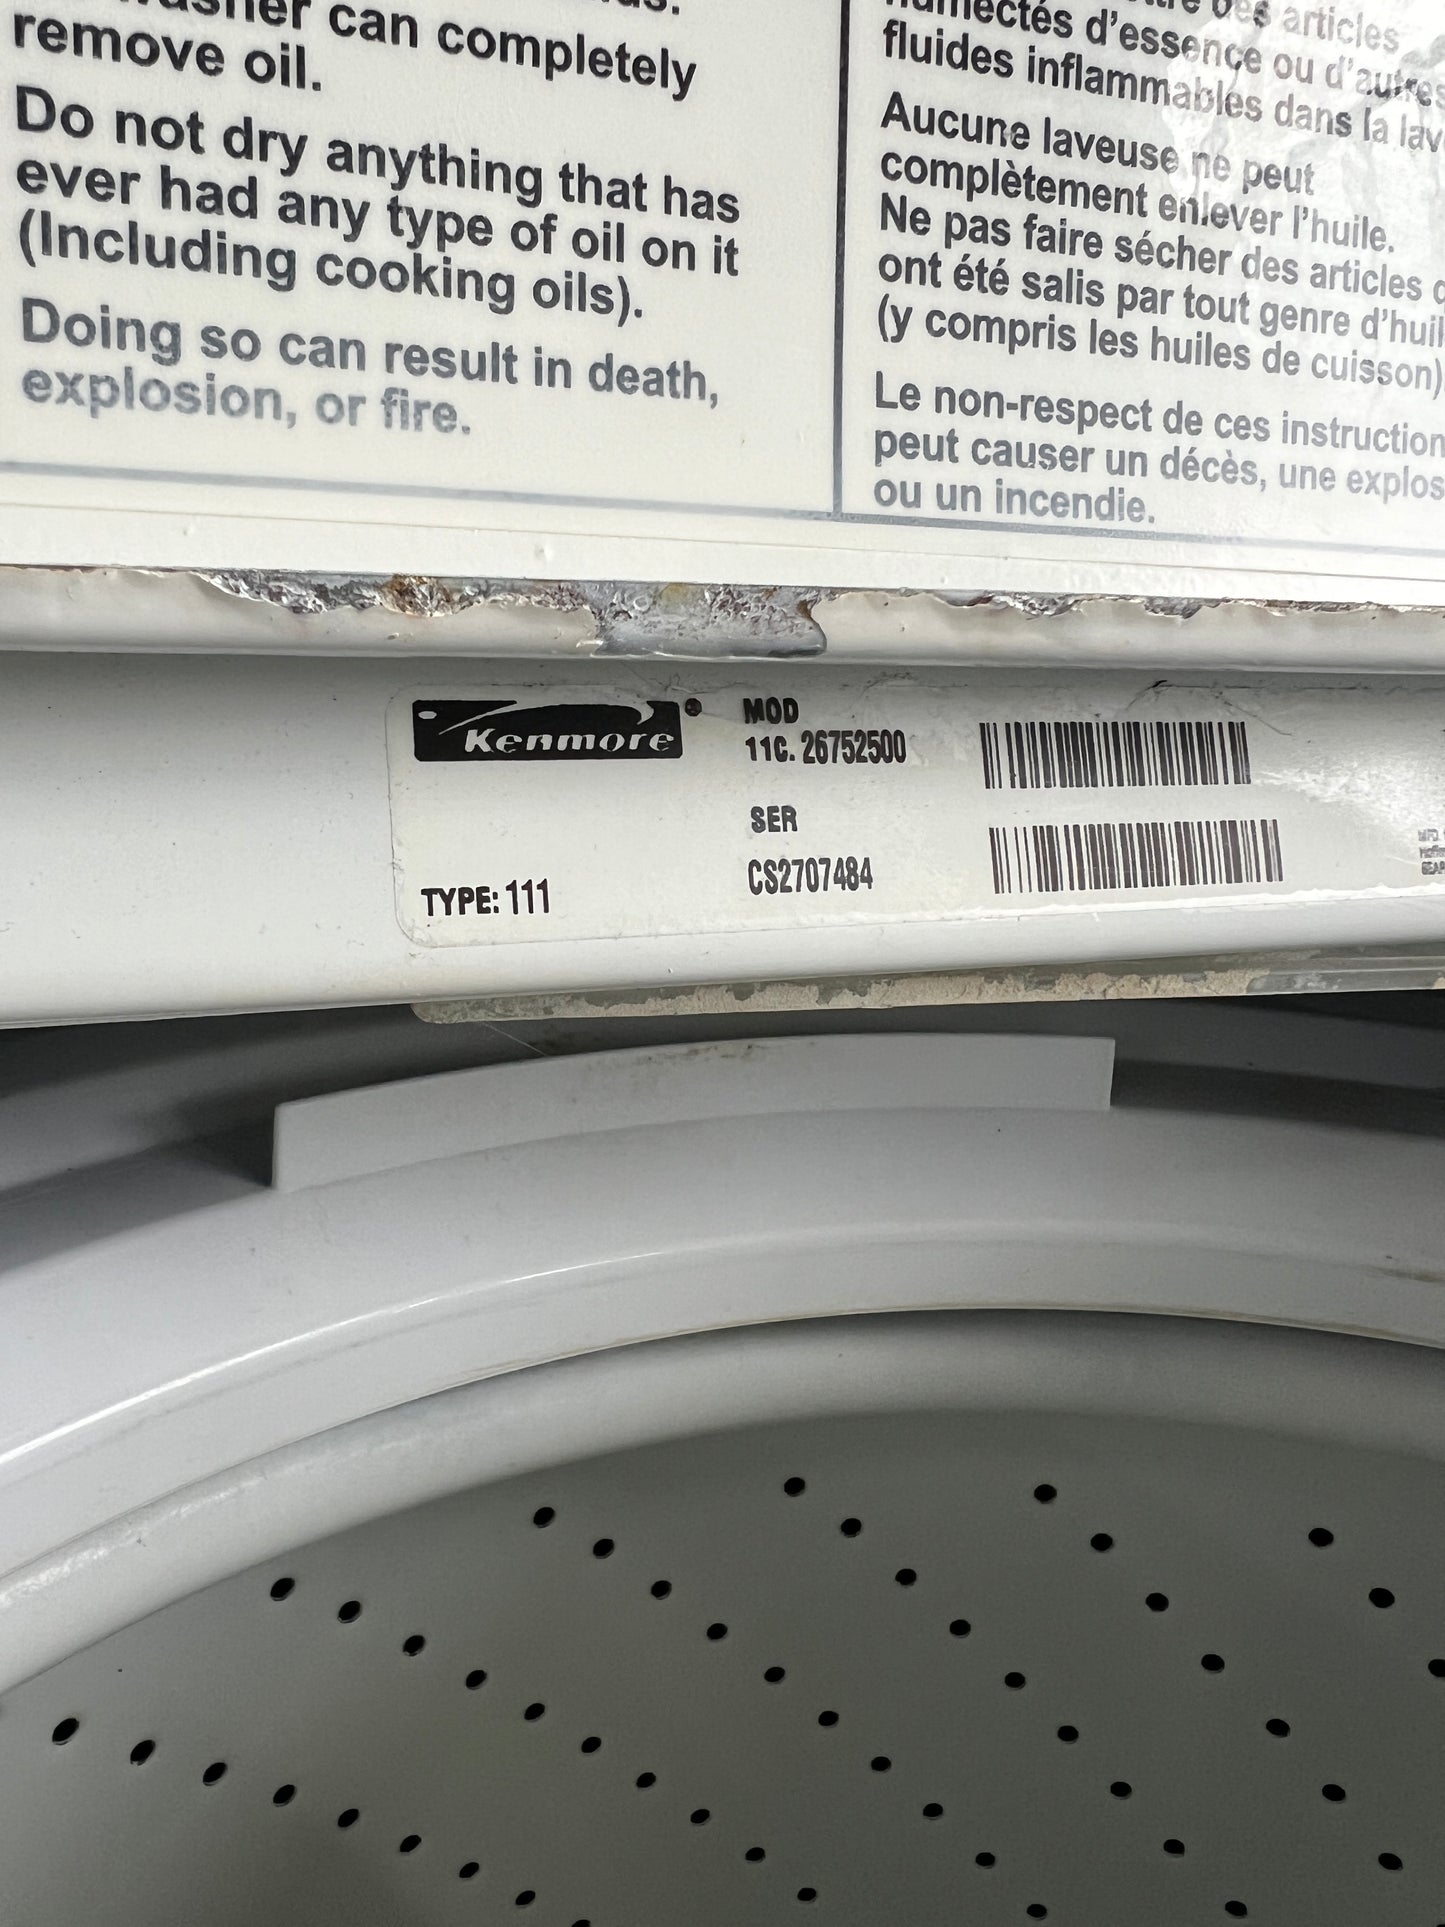 Kenmore 70 Series Top Load Washer In White, 110.26752500, 999698